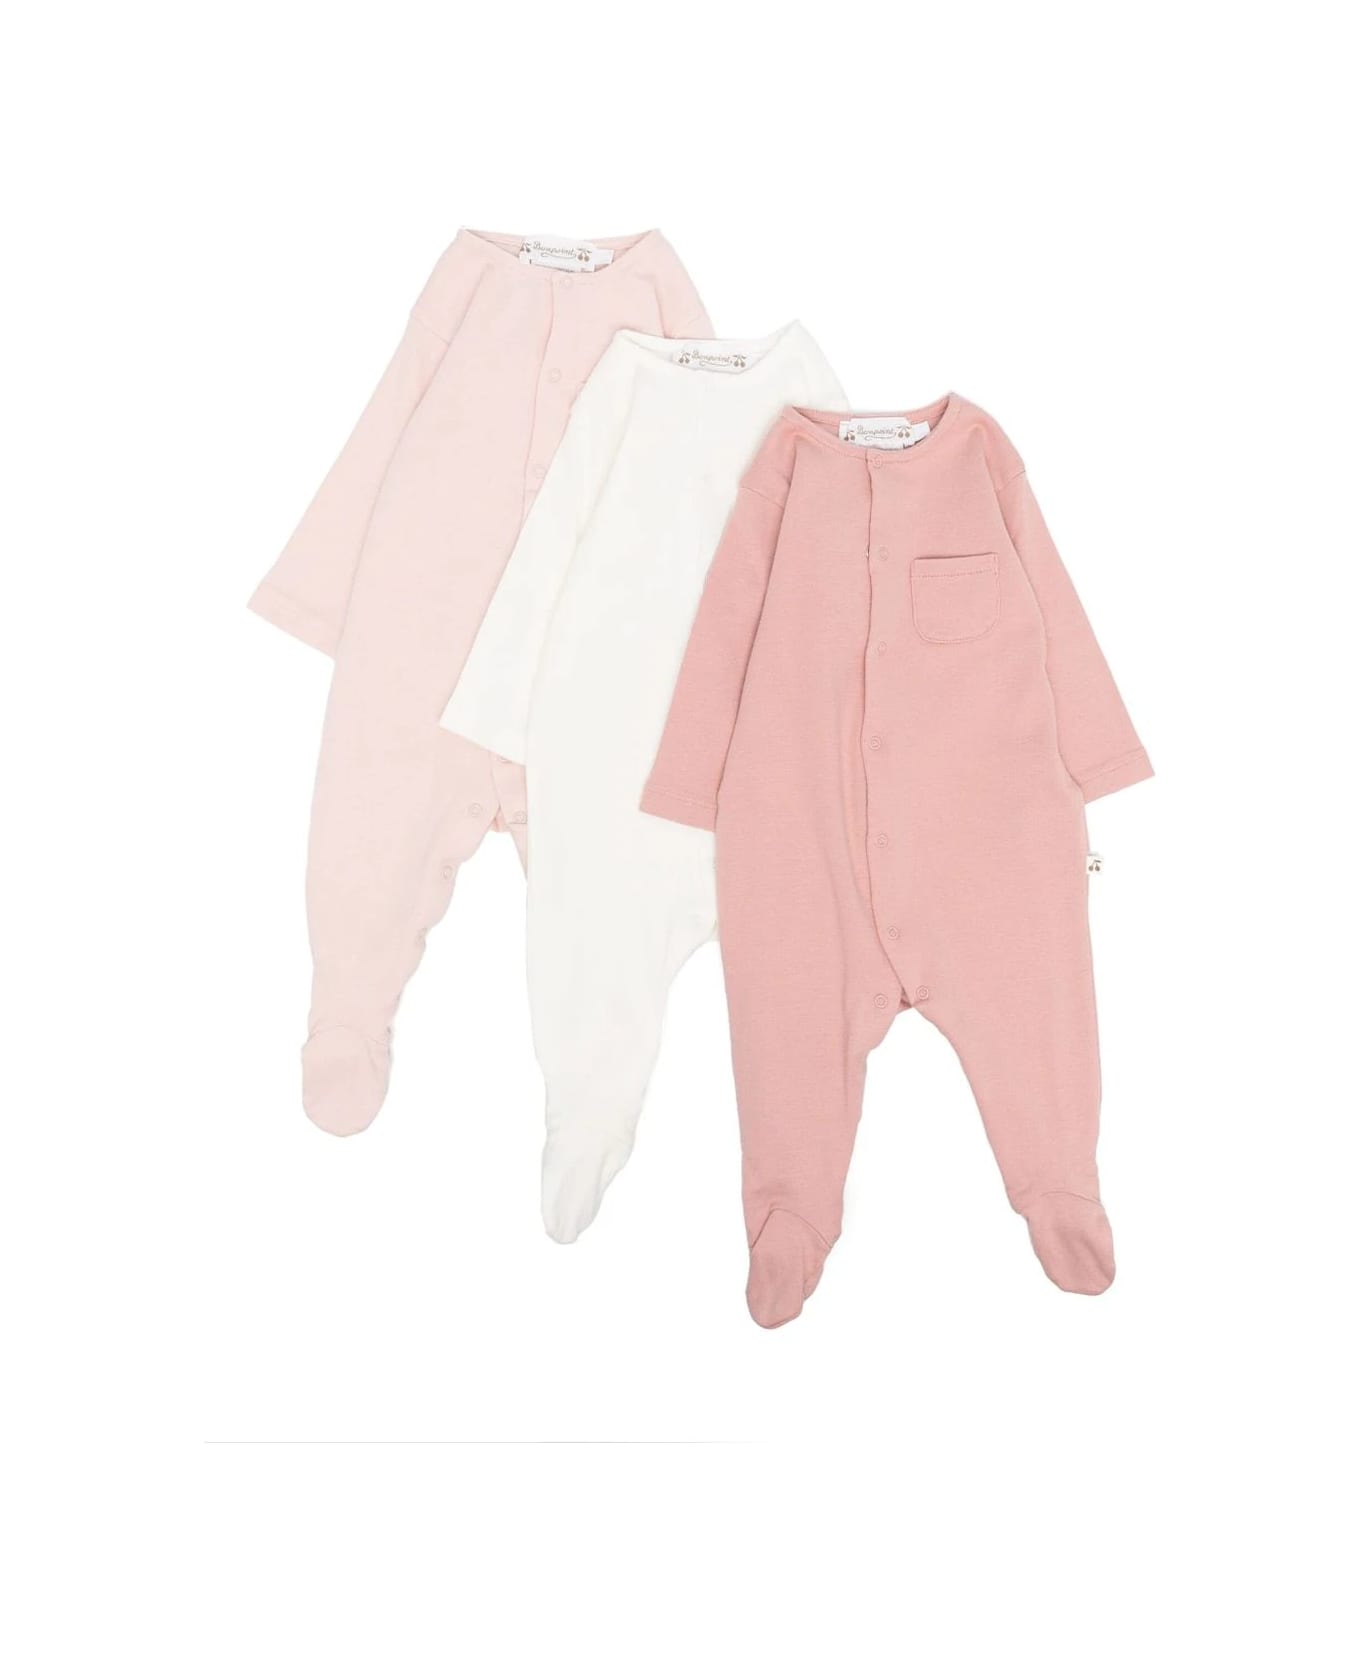 Bonpoint Cosima Pajamas Set In Faded Pink - Pink